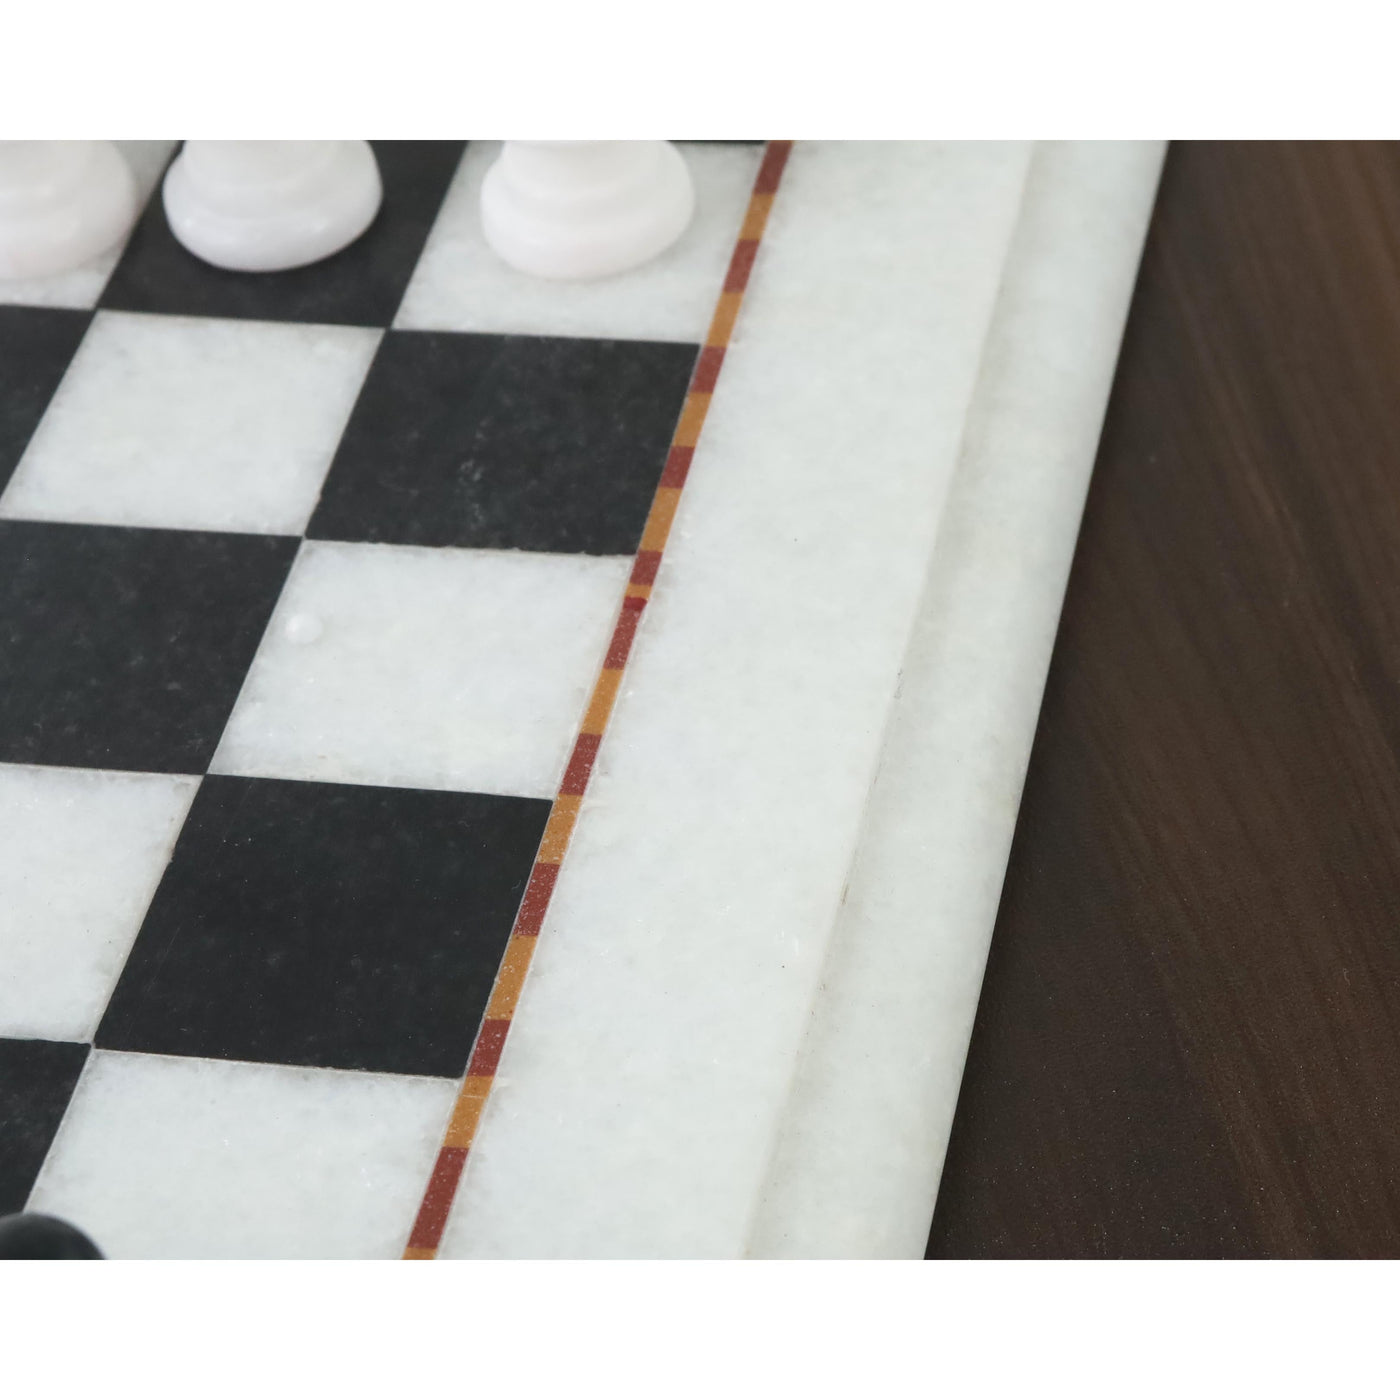 Marble Stone Chess Pieces & Board Set - Black and White - 12" - Handcarved Gift